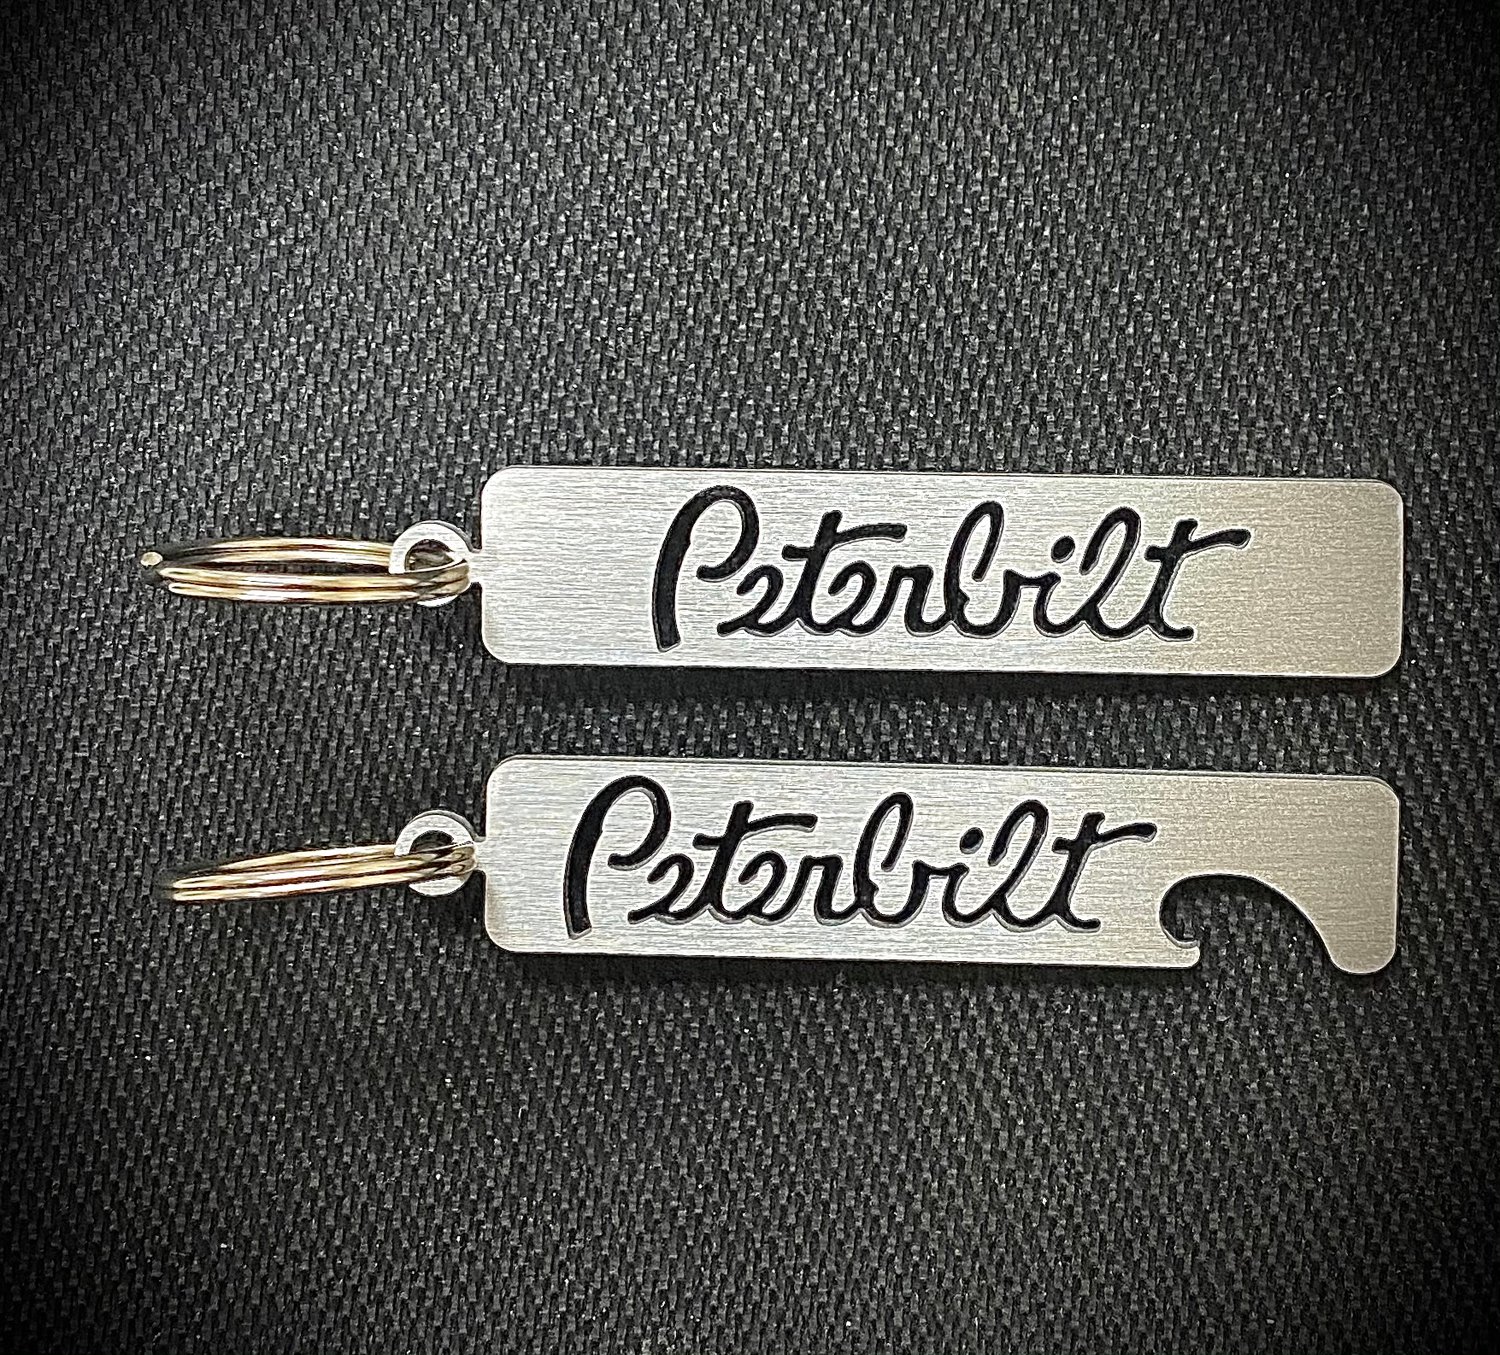 For Peterbilt Enthusiasts 